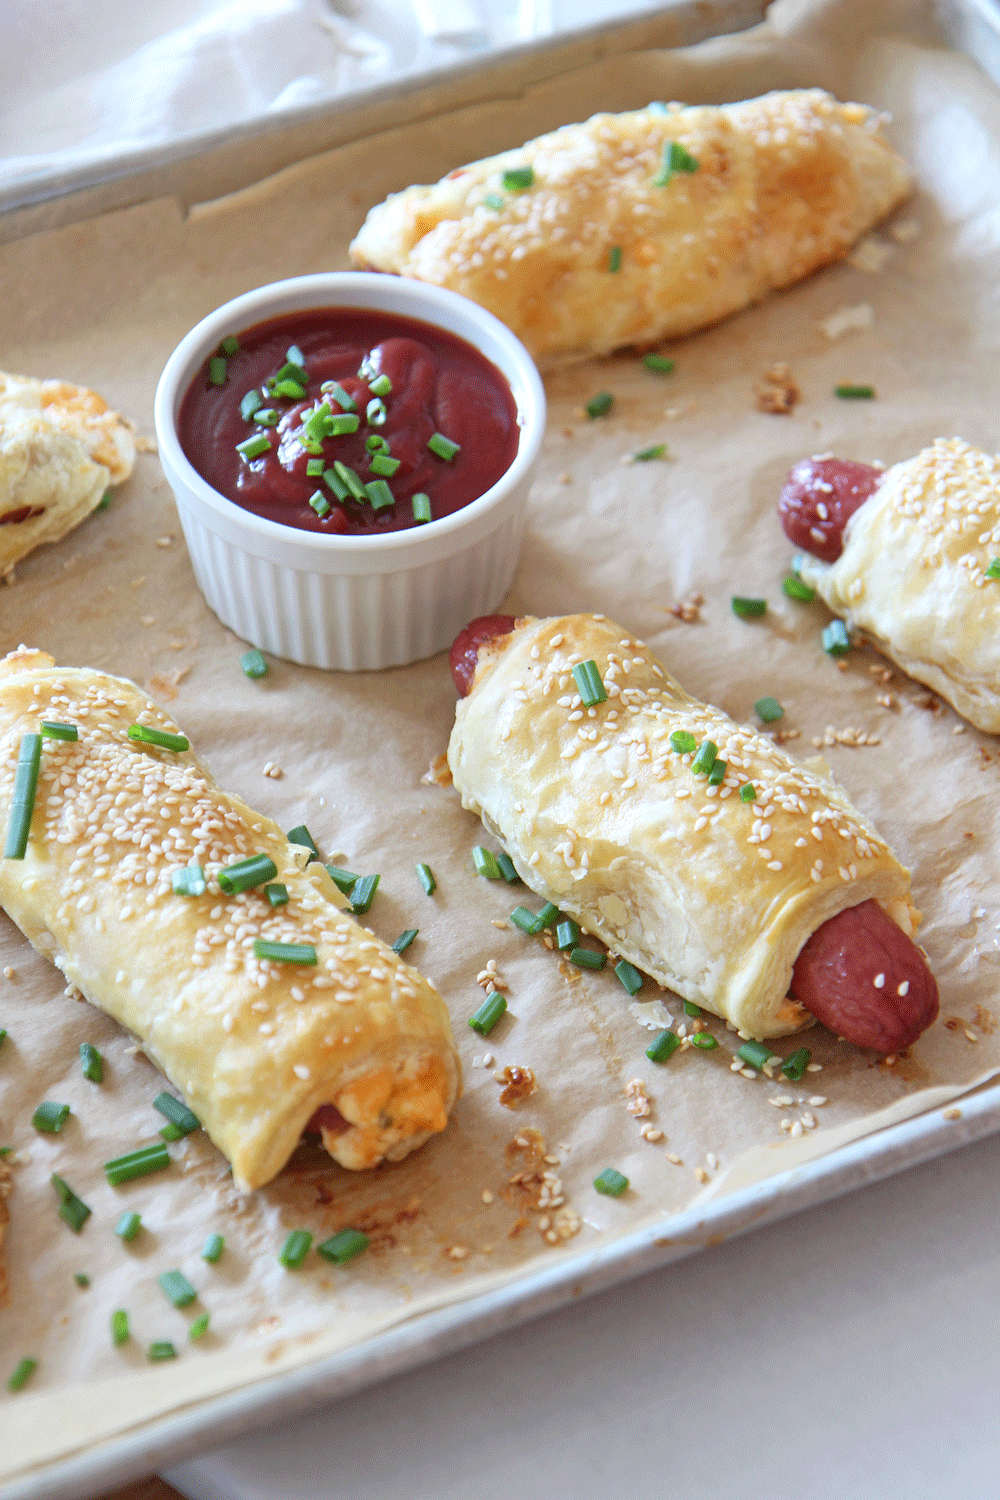 Cheesy Pigs In A Blankets For Dinner. Puff pastry, hot dogs, cream cheese, scallions, cheddar, and pantry ingredients is what you need for this recipe. Pigs in a blanket are a holiday celebration meal and now dinner. Happy Sheet Pan Cooking! #sheetpanrecipes #pigsinablanket